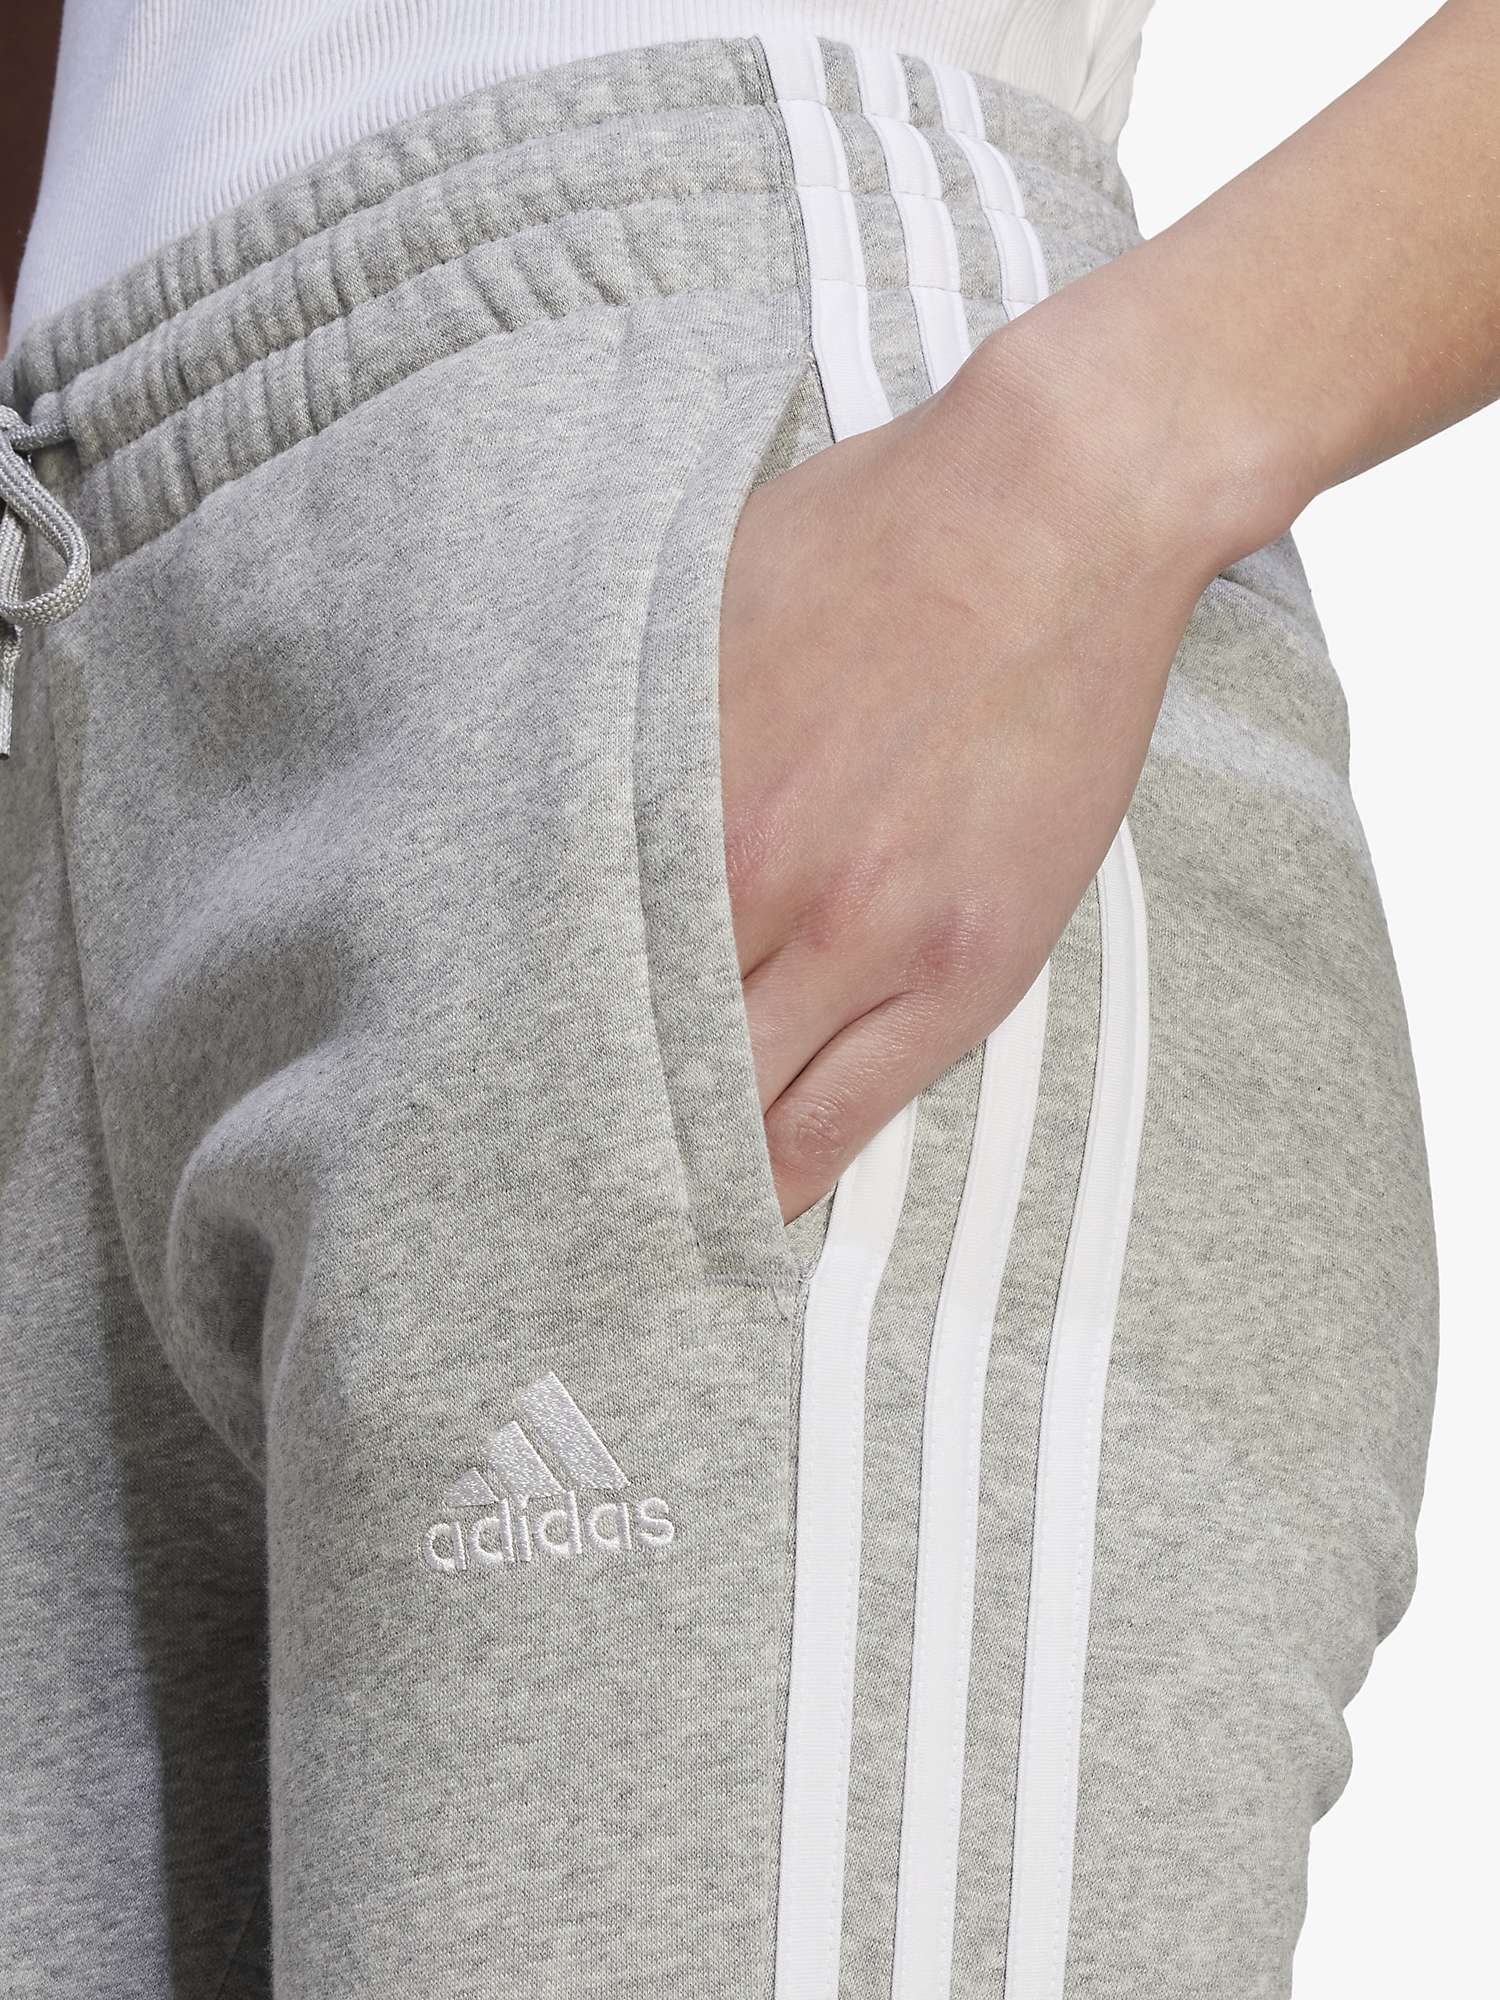 Buy adidas Essentials 3 Stripes French Terry Joggers, Grey Heather/White Online at johnlewis.com